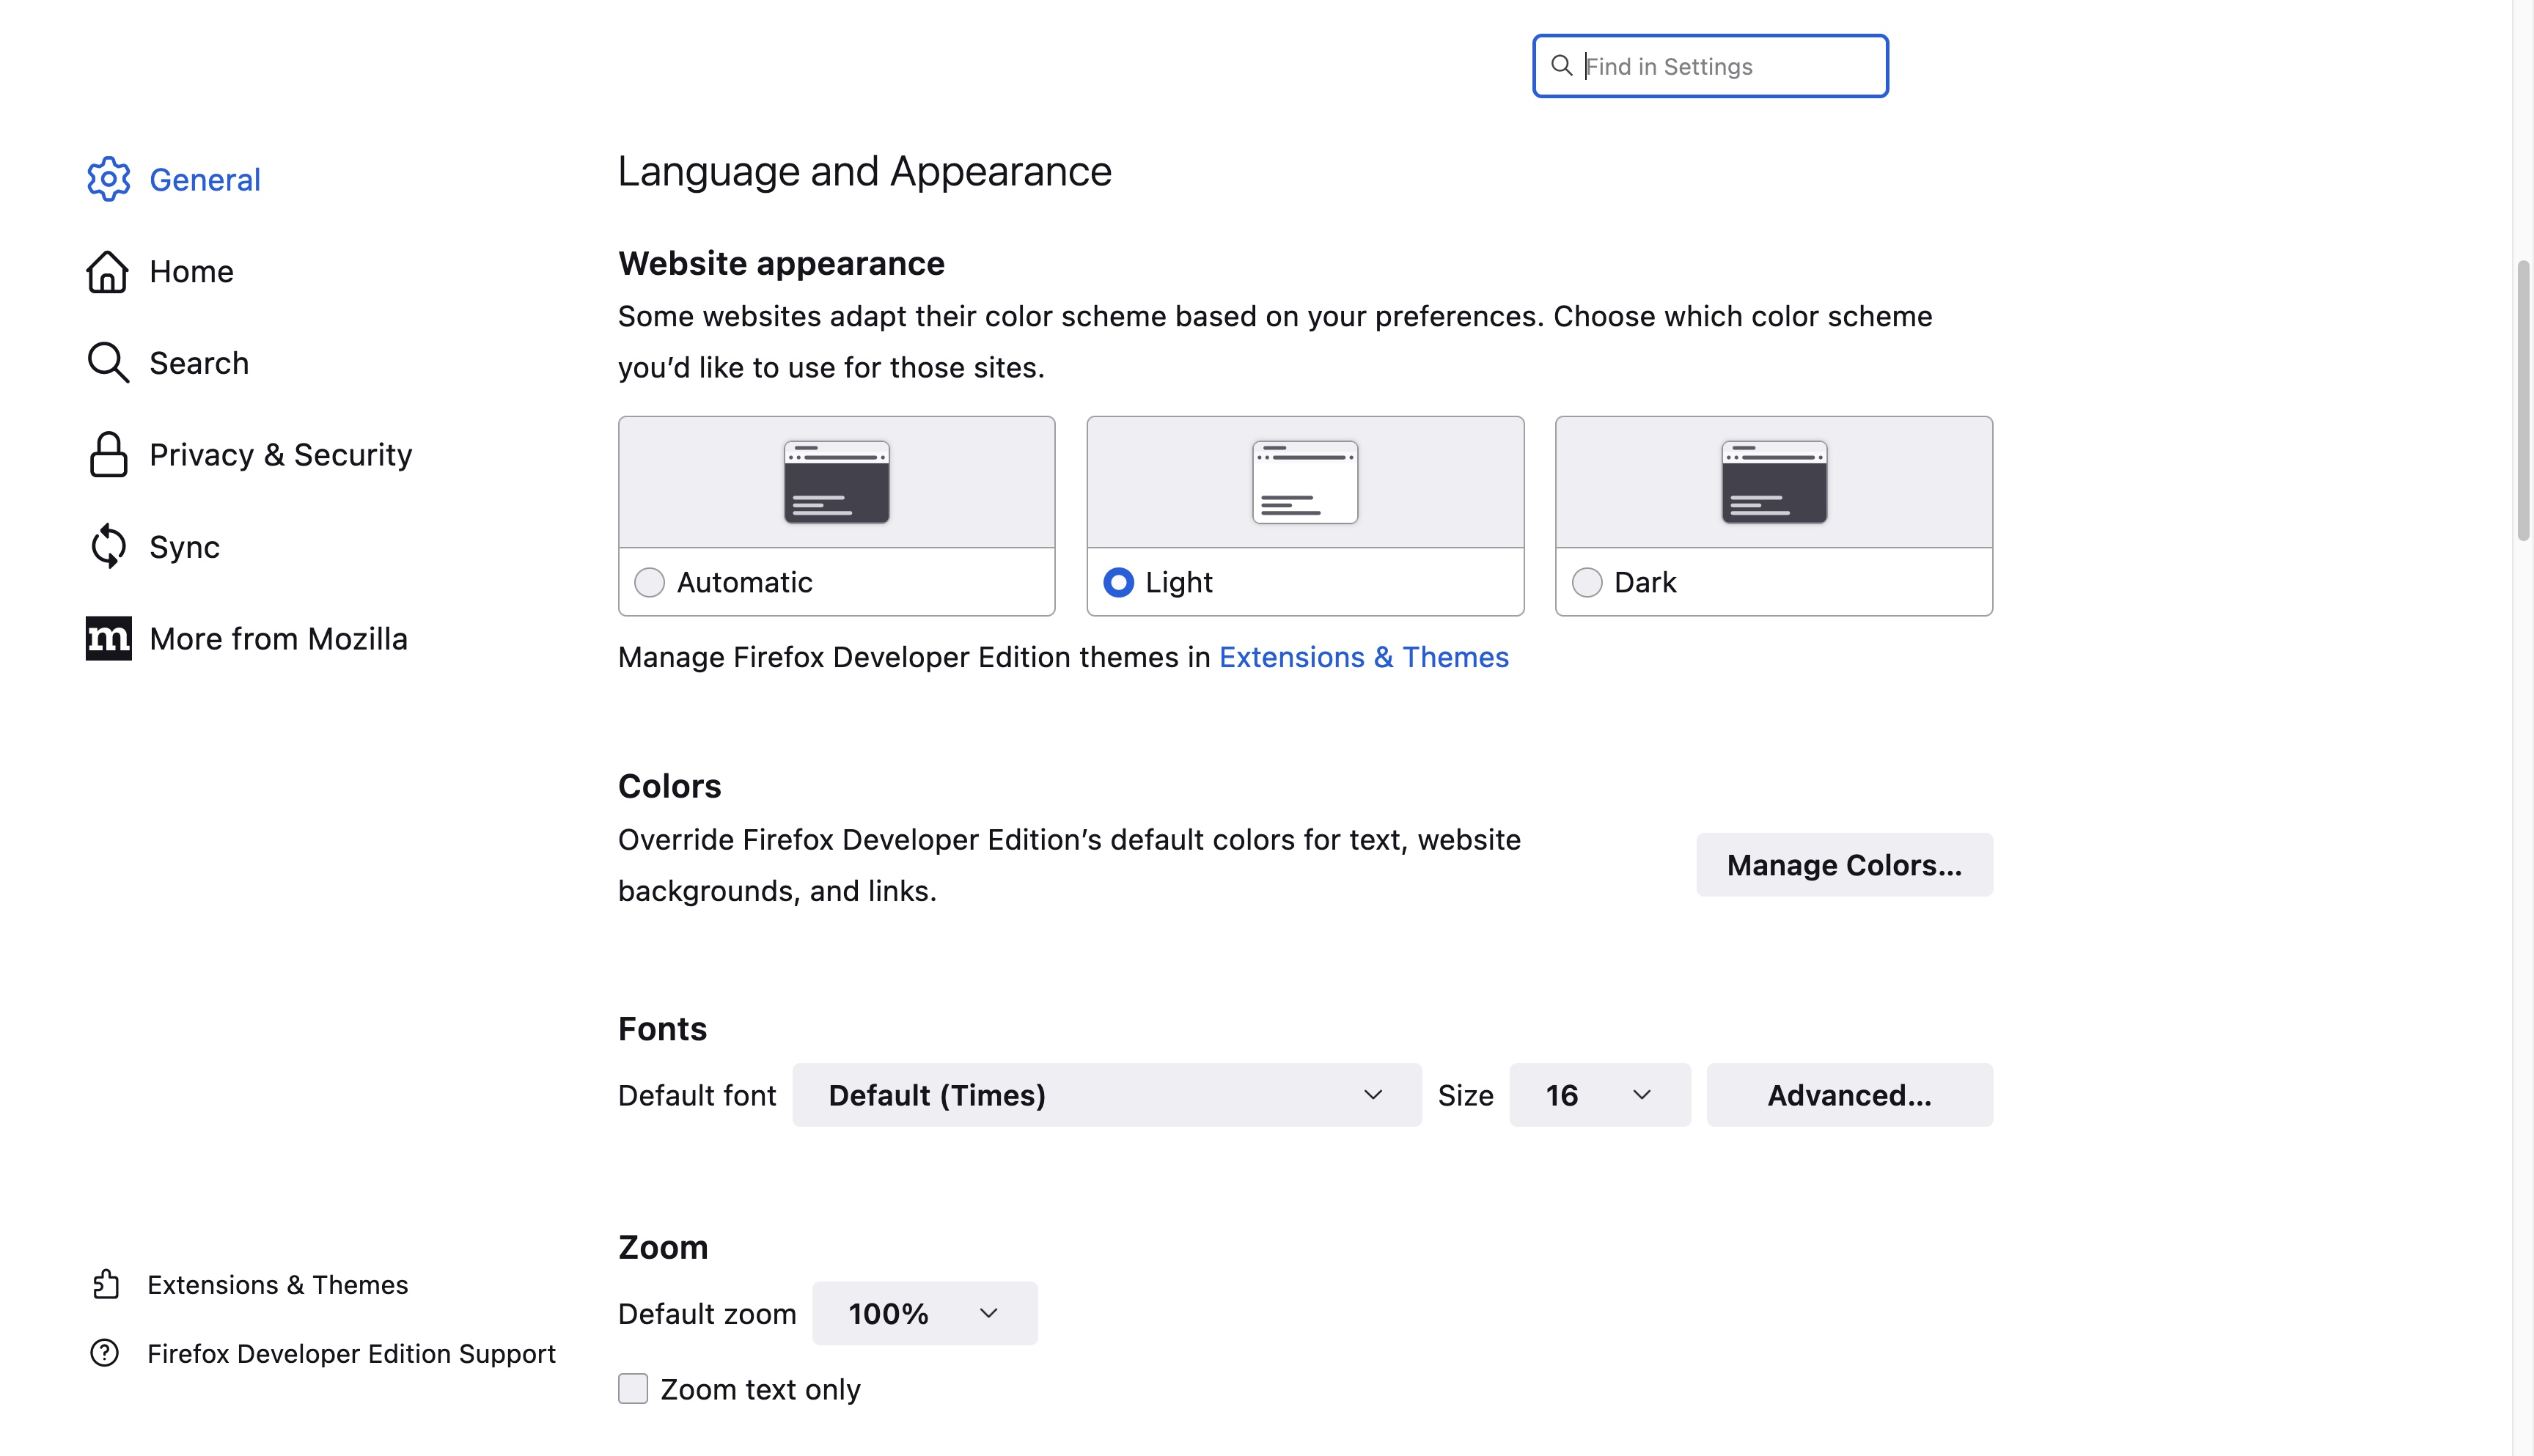 Language and appearance preferences in Firefox
include light/dark mode,
colors, fonts, and zoom level
